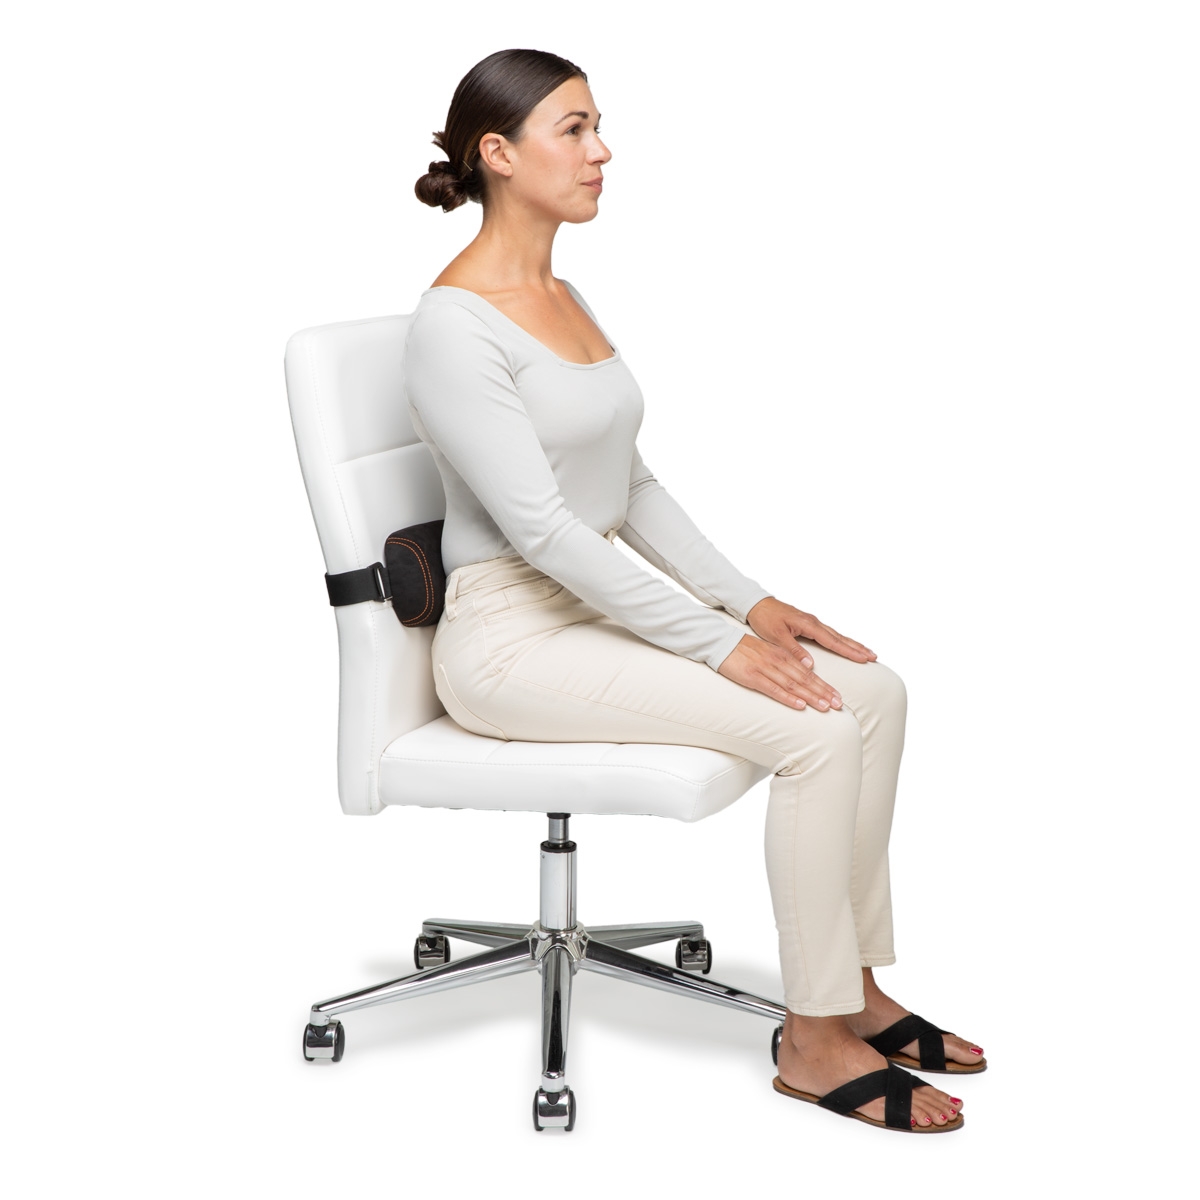 The Original McKenzie Super Roll by OPTP – USA-made Low Back Lumbar Support  for Office Chairs, Car Seats and Travel. The Preferred Lumbar Pillow by  Physical Therapists and Chiropractors. 